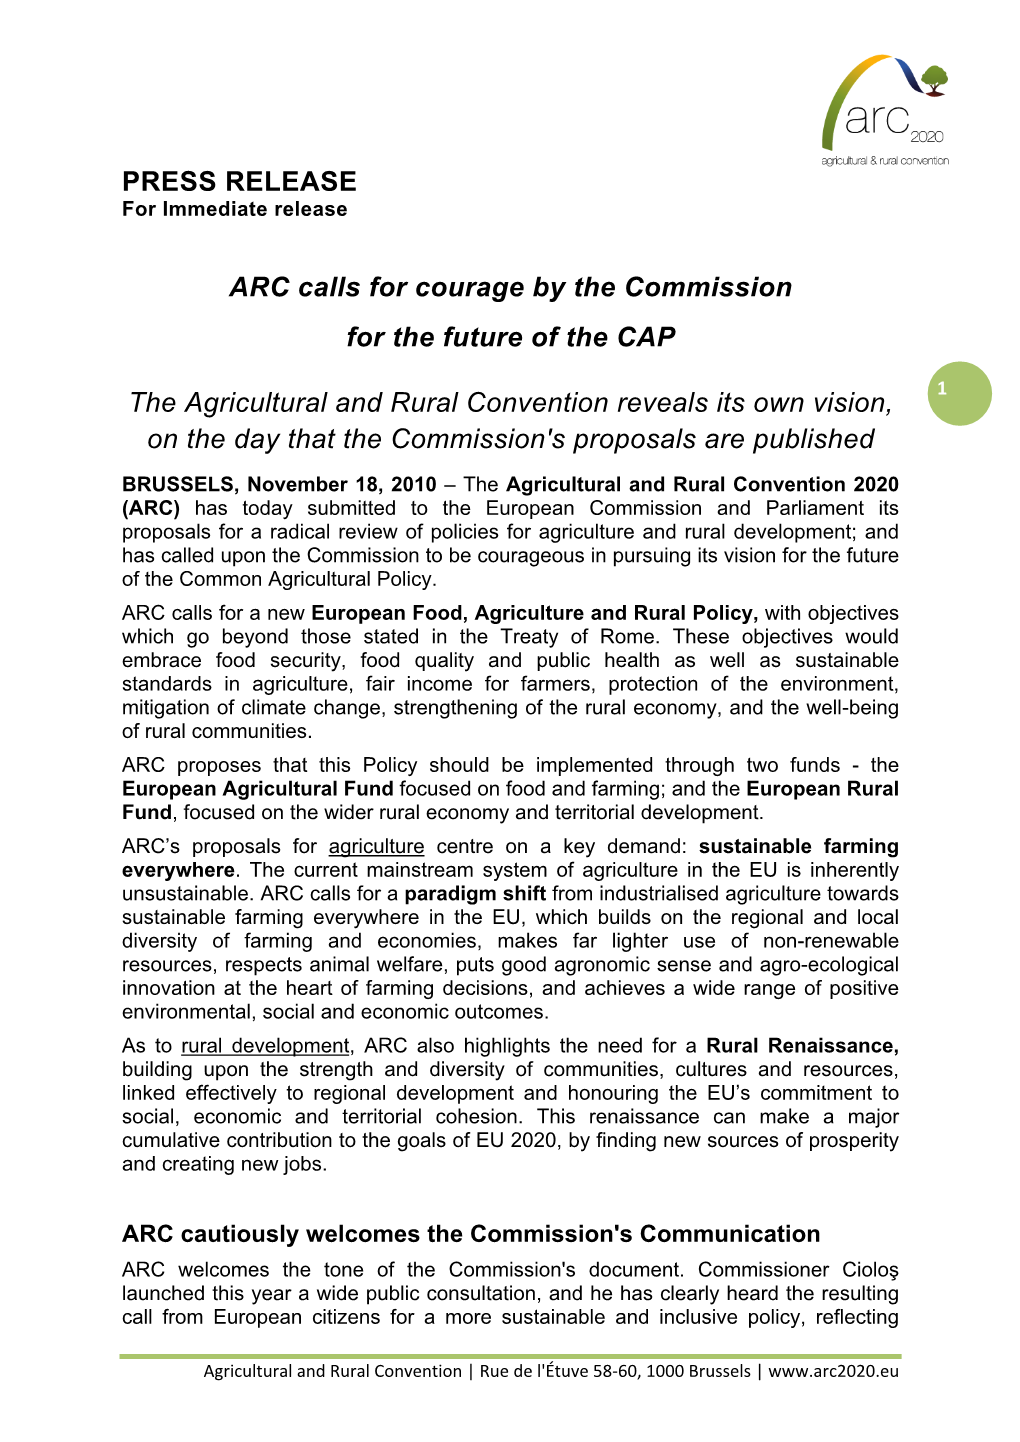 PRESS RELEASE ARC Calls for Courage by the Commission for the Future of the CAP the Agricultural and Rural Convention Reveals I